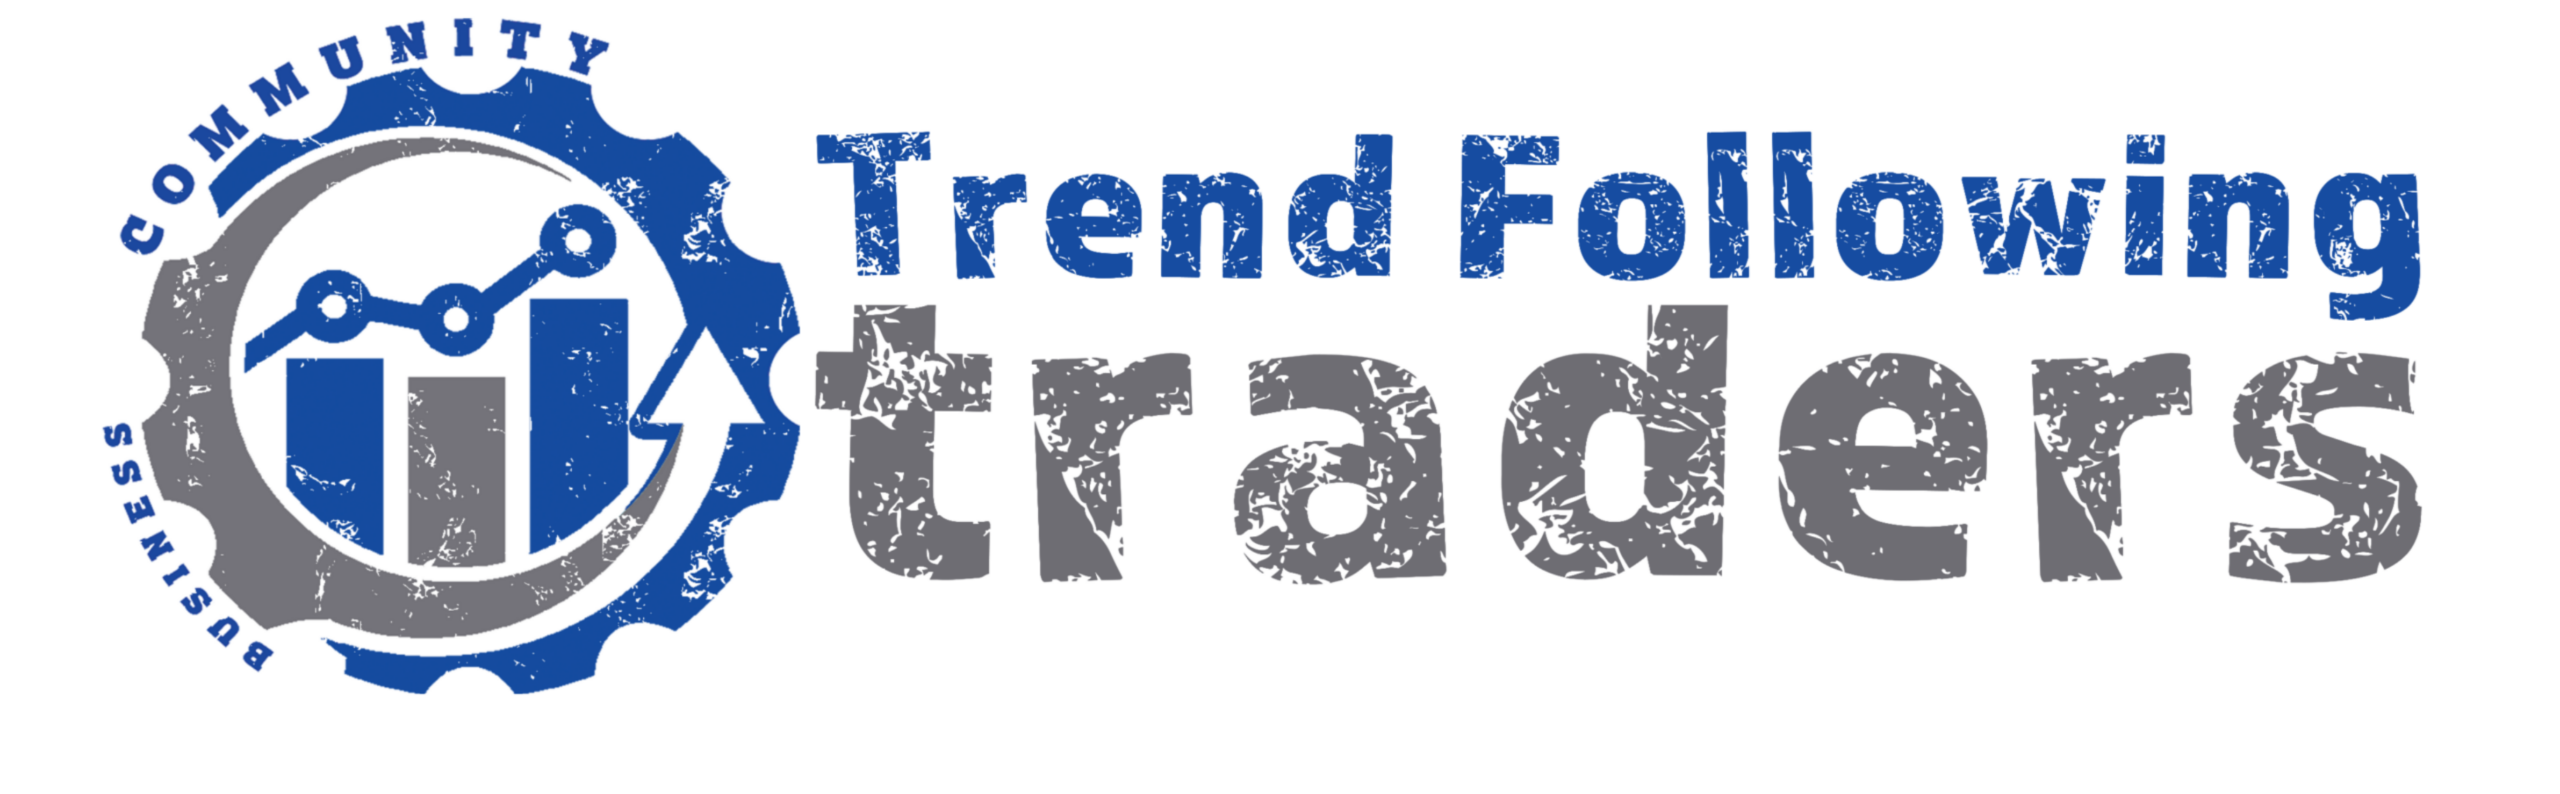 Trend Following Traders – Billing Site